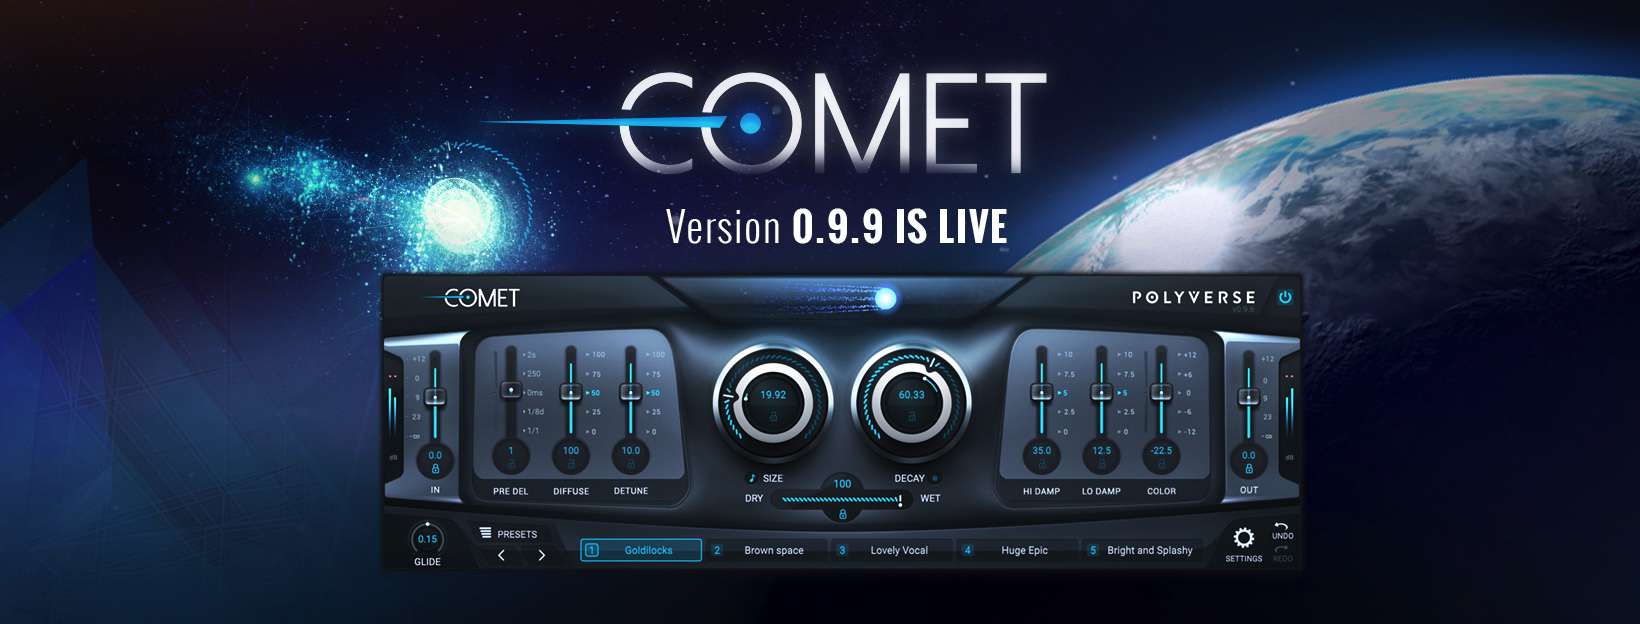 Comet by Polyverse Music Updated to Version 0.9.9